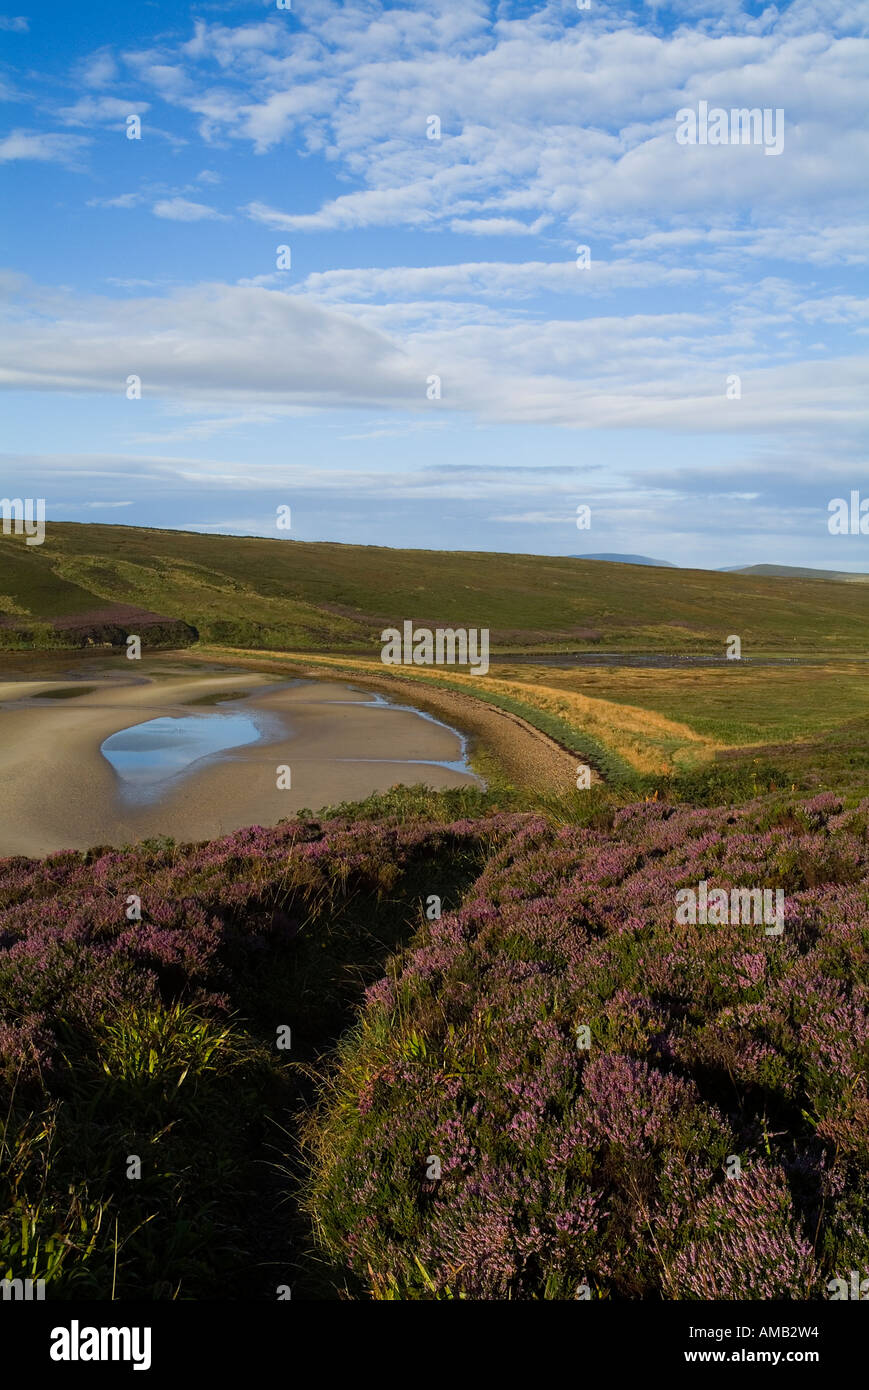 dh Waulkmill Bay ORPHIR ORKNEY Footpath through purple heather down to sandy bay foot path beach shore sand Stock Photo